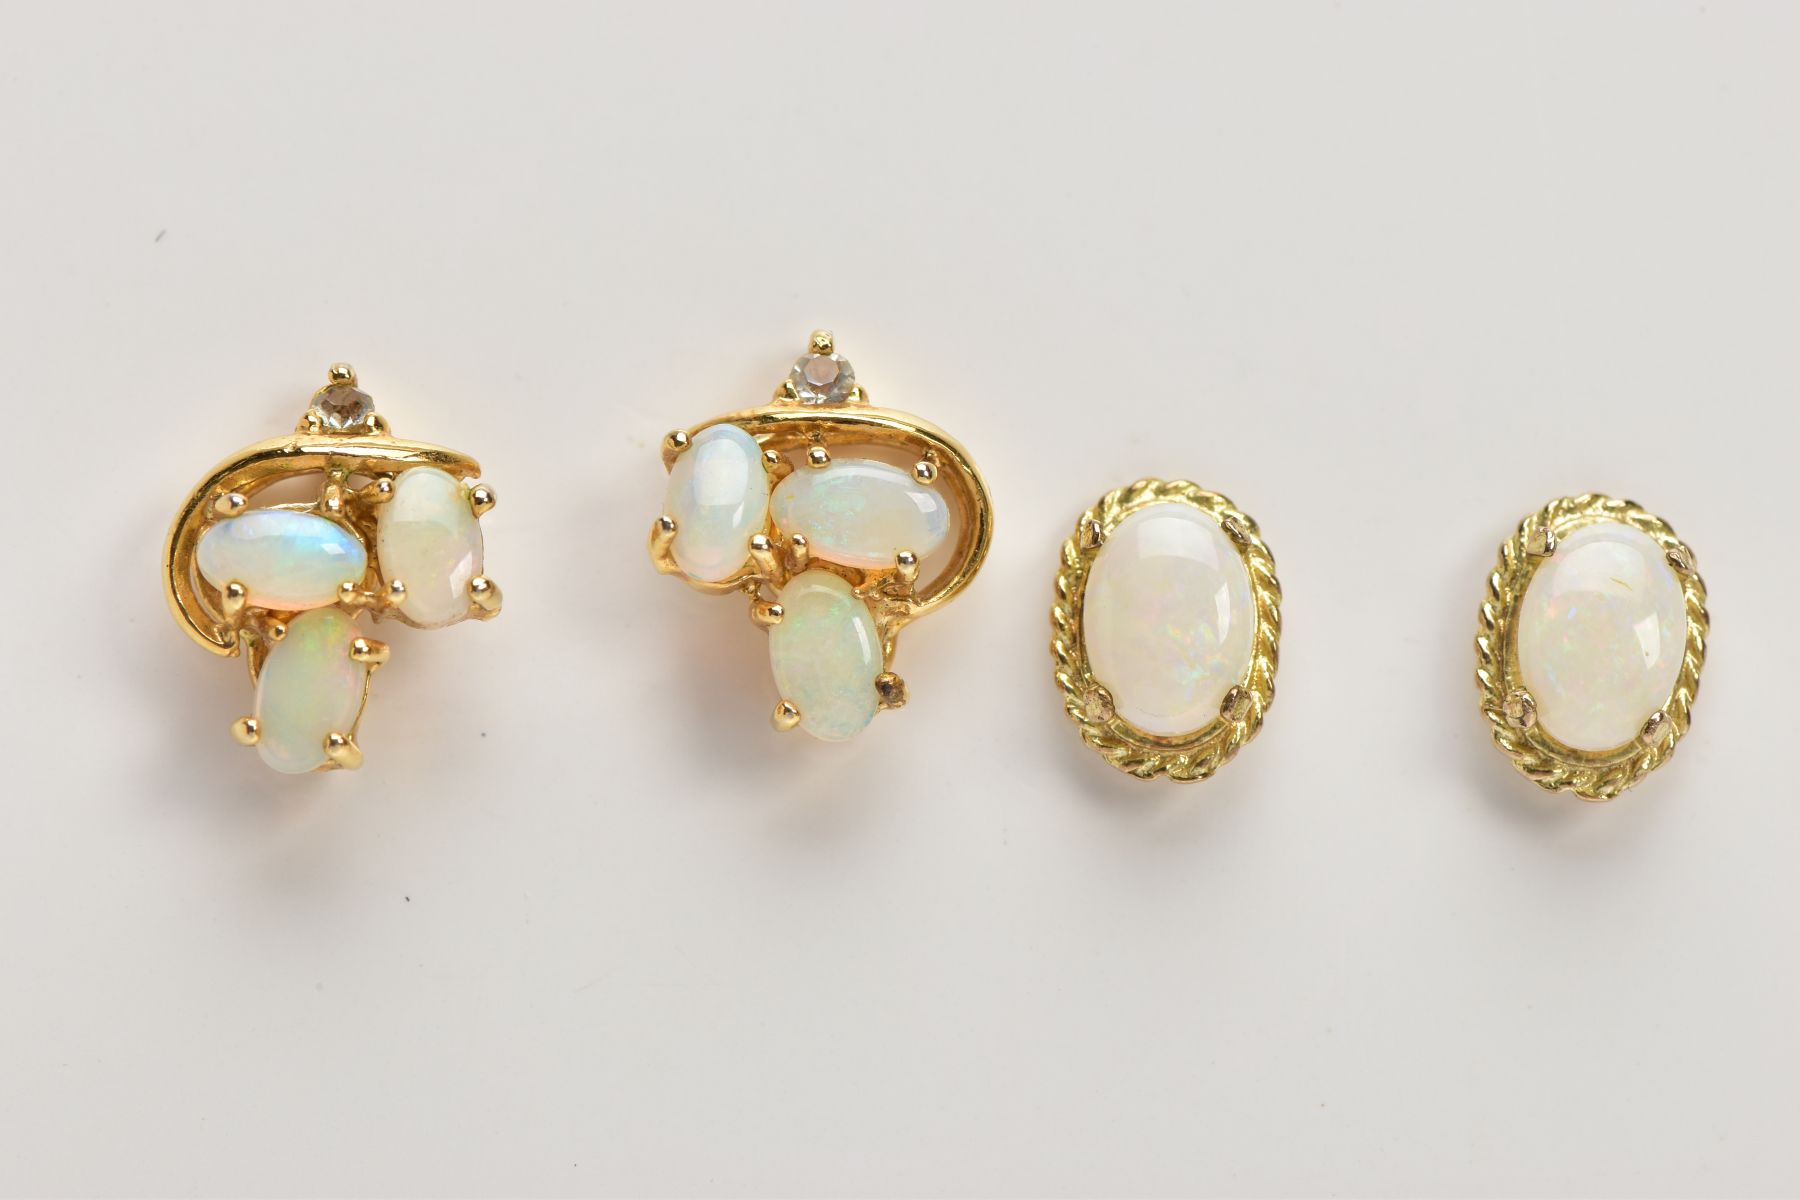 TWO PAIRS OF OPAL EARRINGS, the first of an oval design, set with an oval opal cabochon, within a